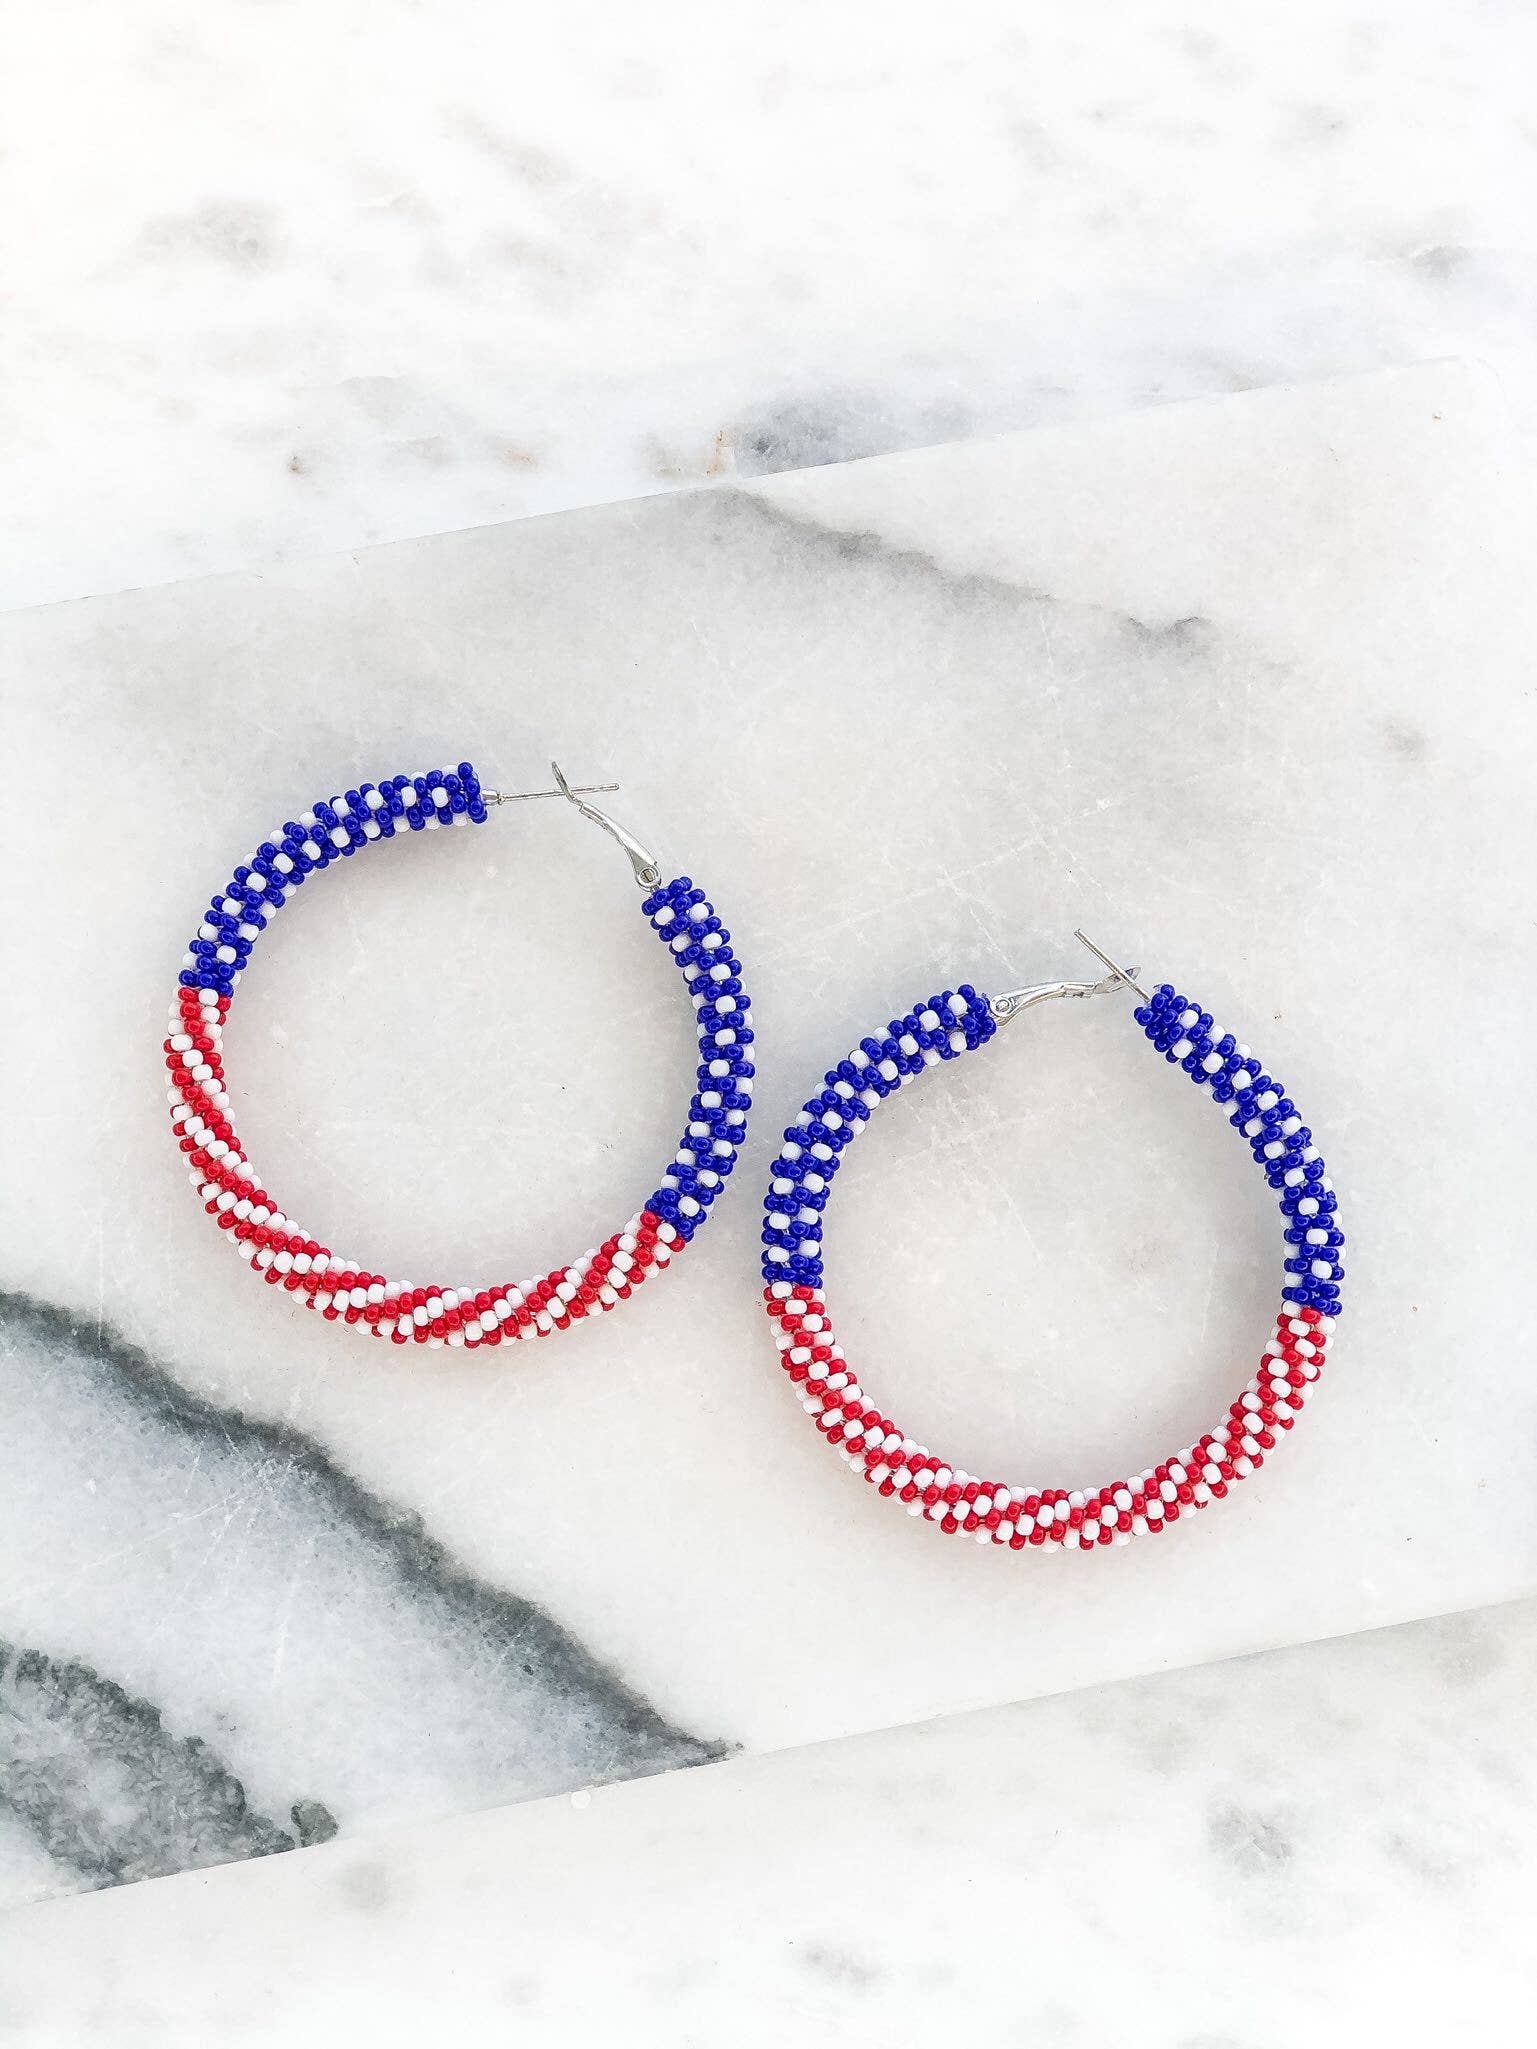 Beaded hoop earrings.  Top half has blue and white beads, representing the stars portion of the flag.  Bottom half has red and white beads, representing the stripes portion of the flag.